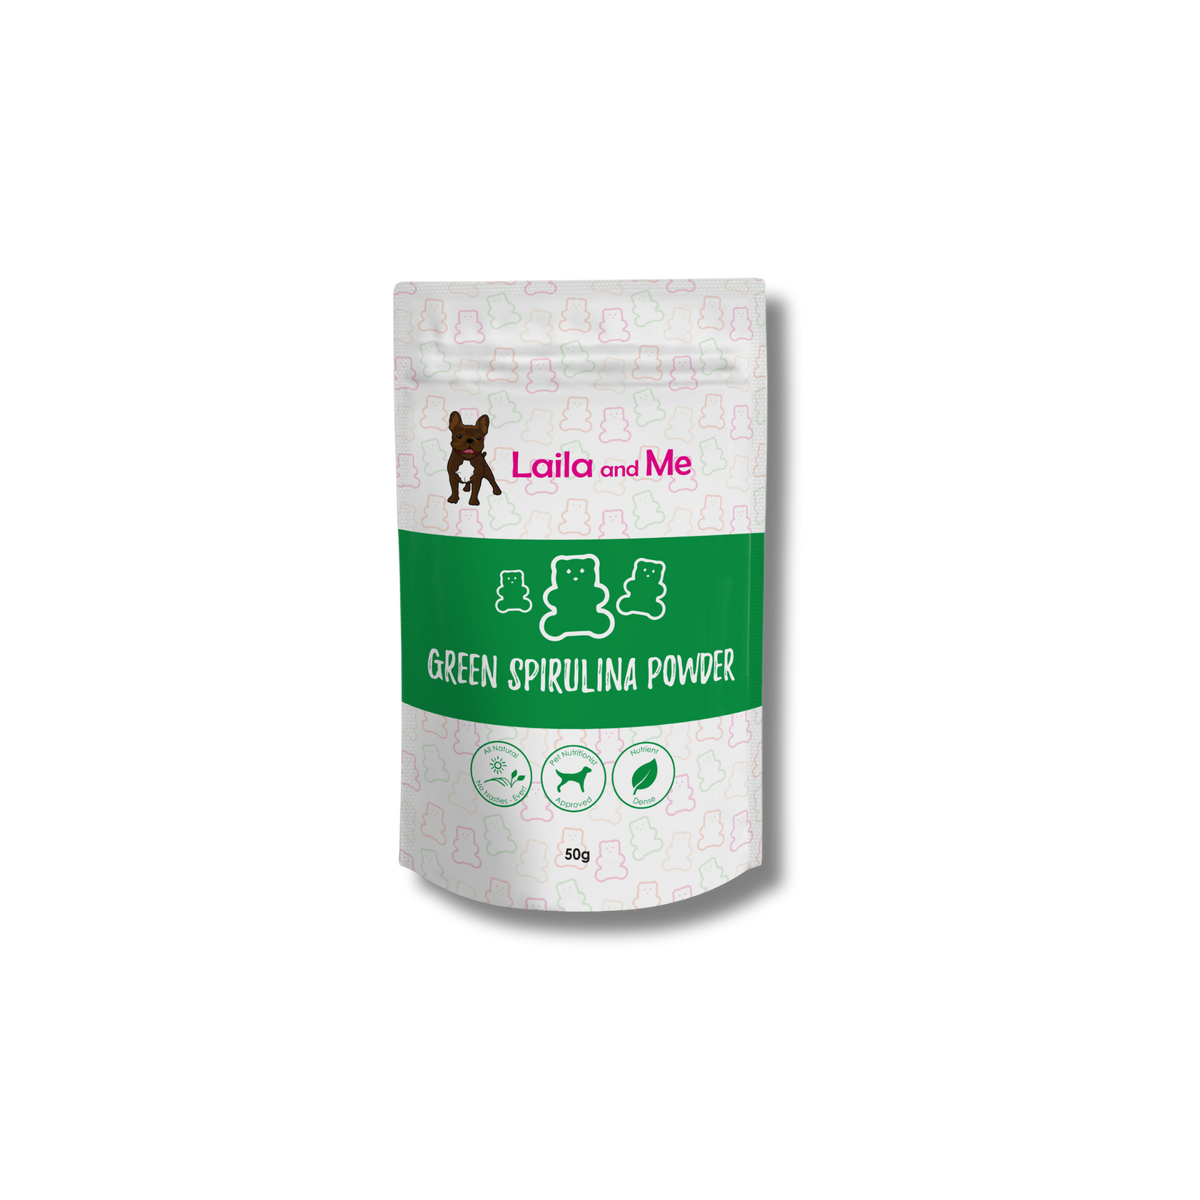 Green Spirulina Powder for Pets - Laila and Me